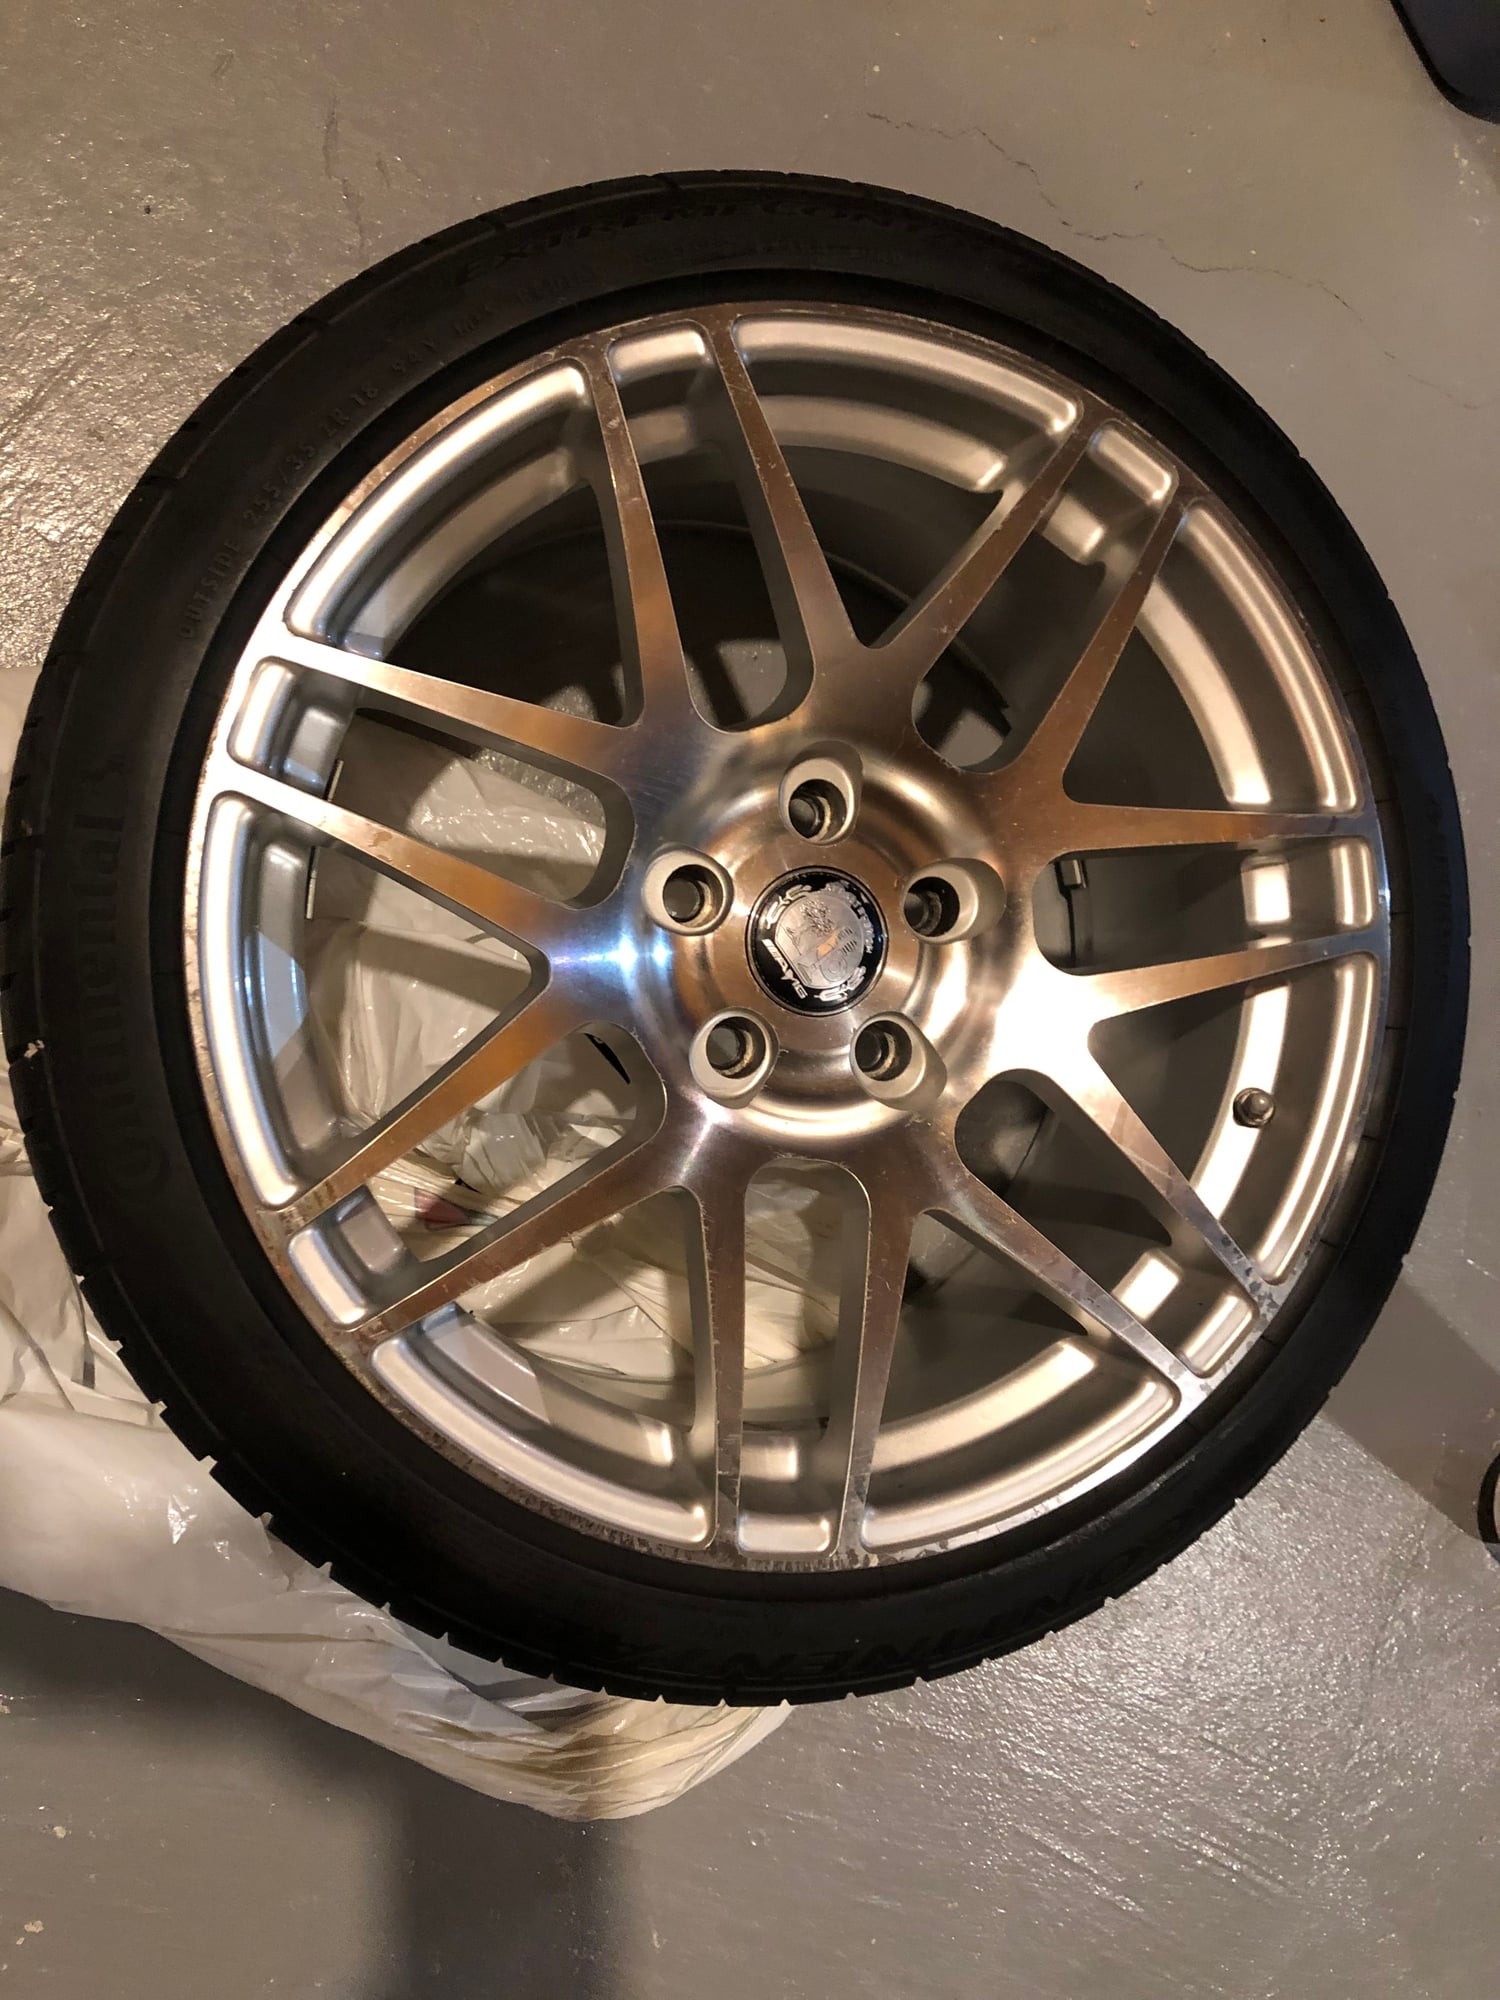 Drivetrain - Toronto: 18” Forgestar F14 wheels and Continental snowtires (very cheap, must sell!) - Used - 2008 to 2012 Mercedes-Benz C300 - Toronto, ON L4E1C5, Canada